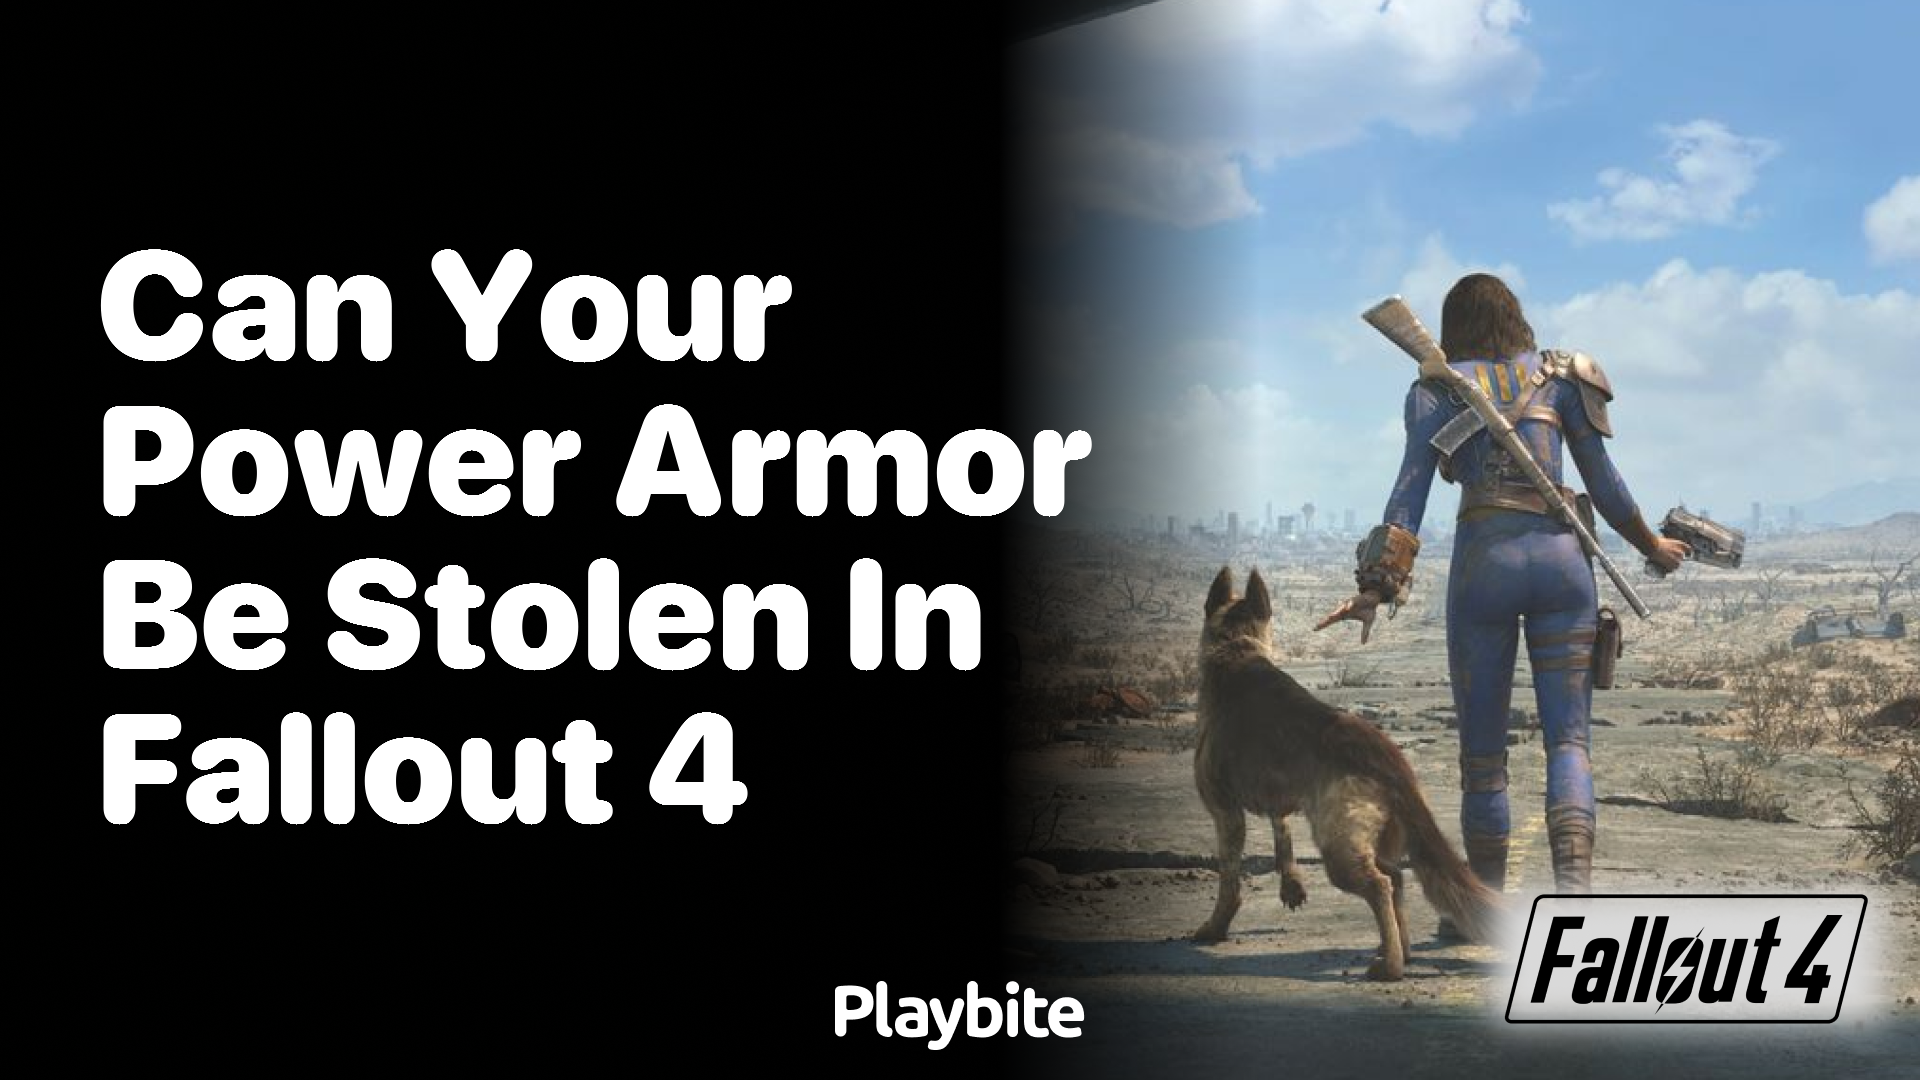 Can Your Power Armor Be Stolen in Fallout 4?